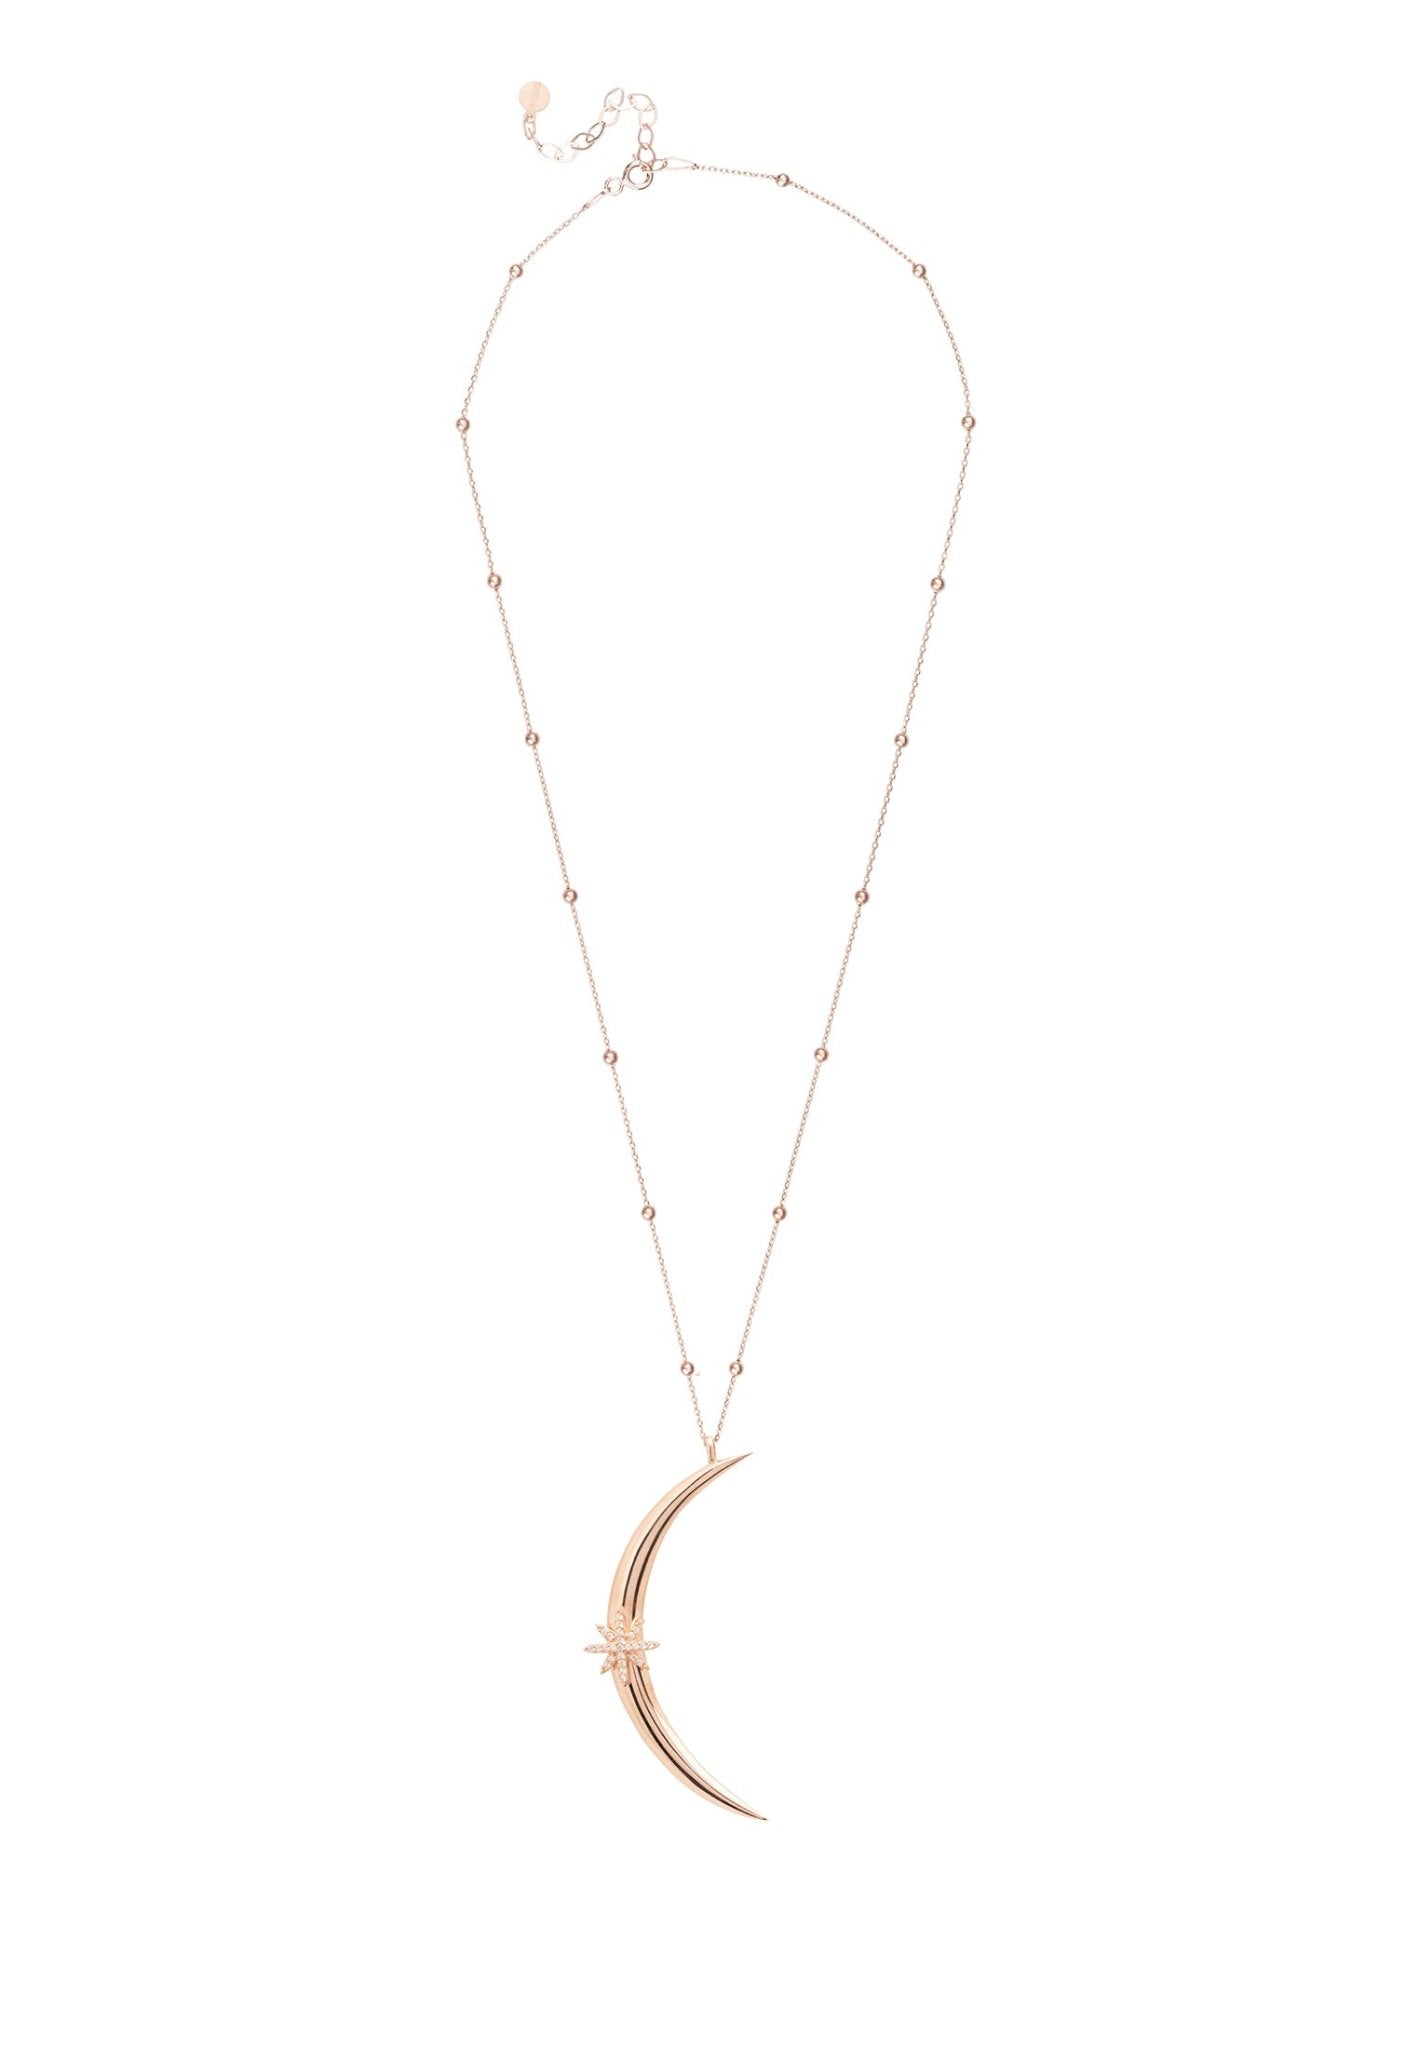 Moon Crescent Star Necklace Beaded Chain Rosegold - LATELITA Necklaces